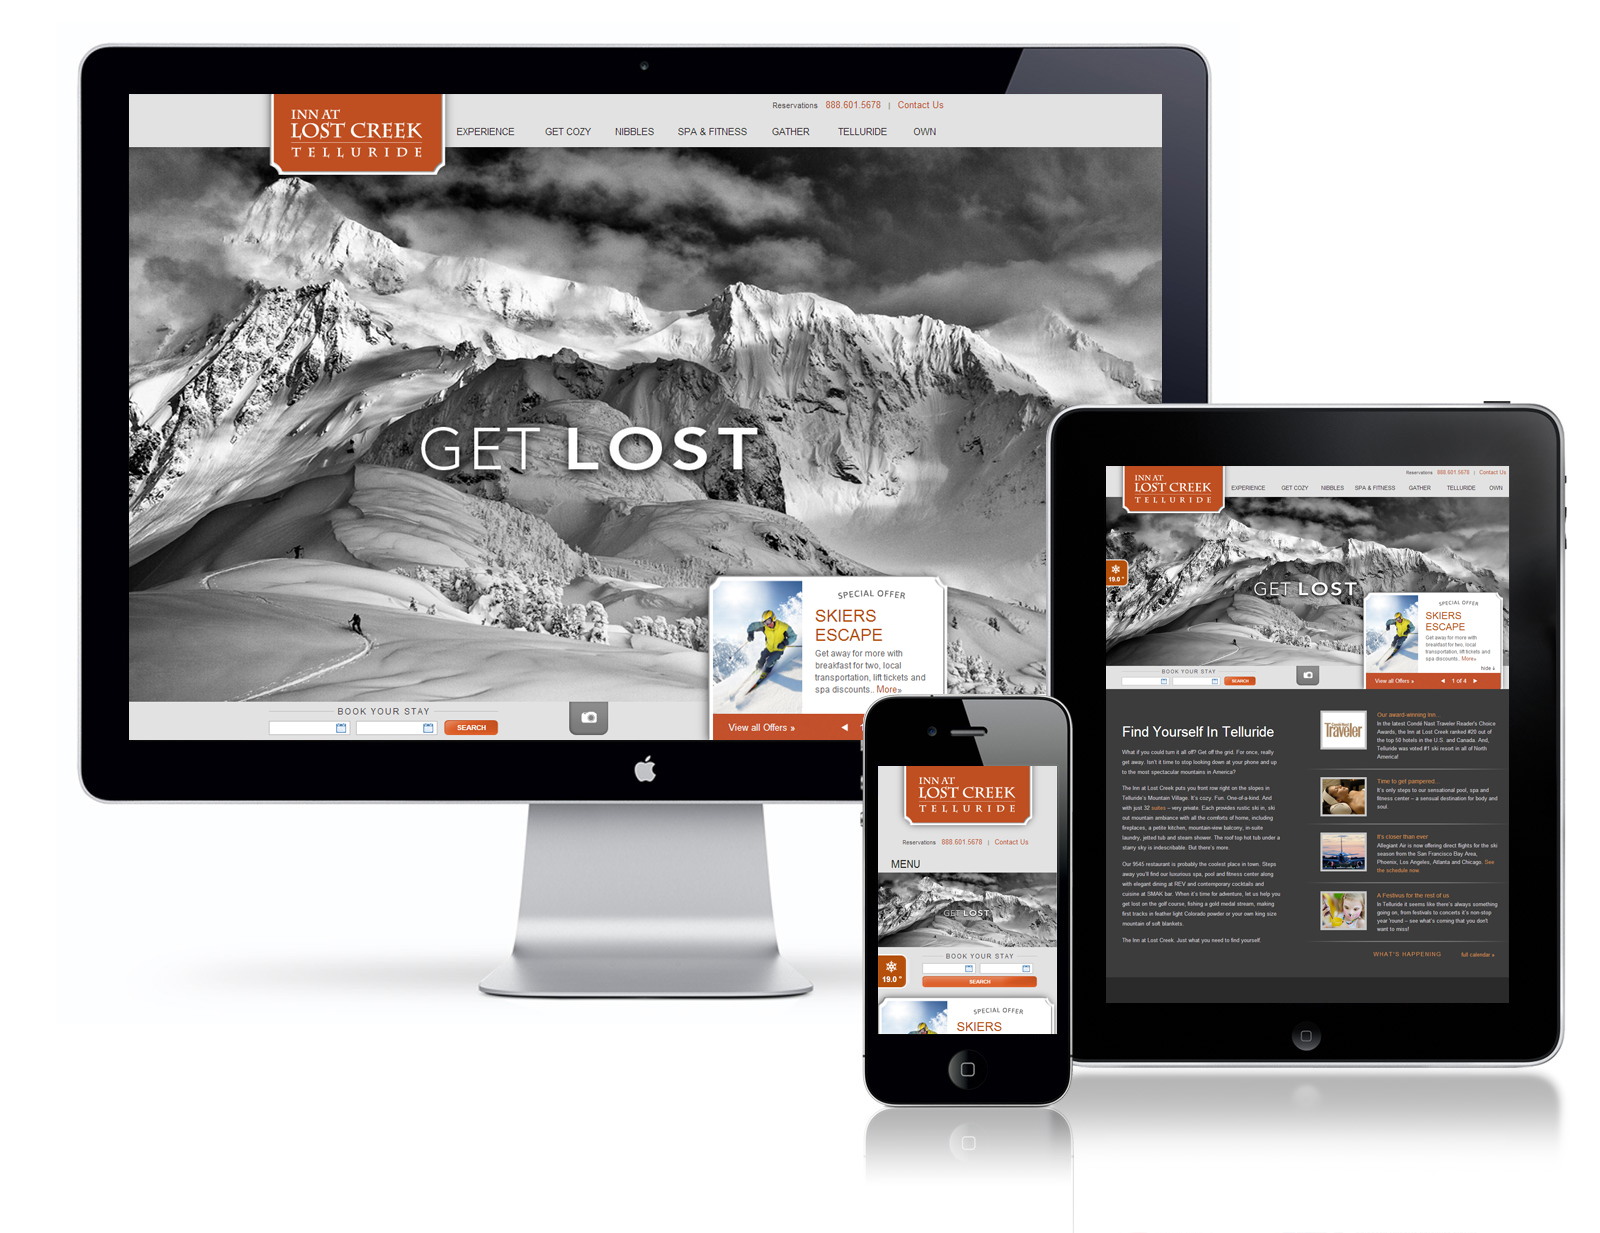 4 Lessons from Responsive Design for CMOs